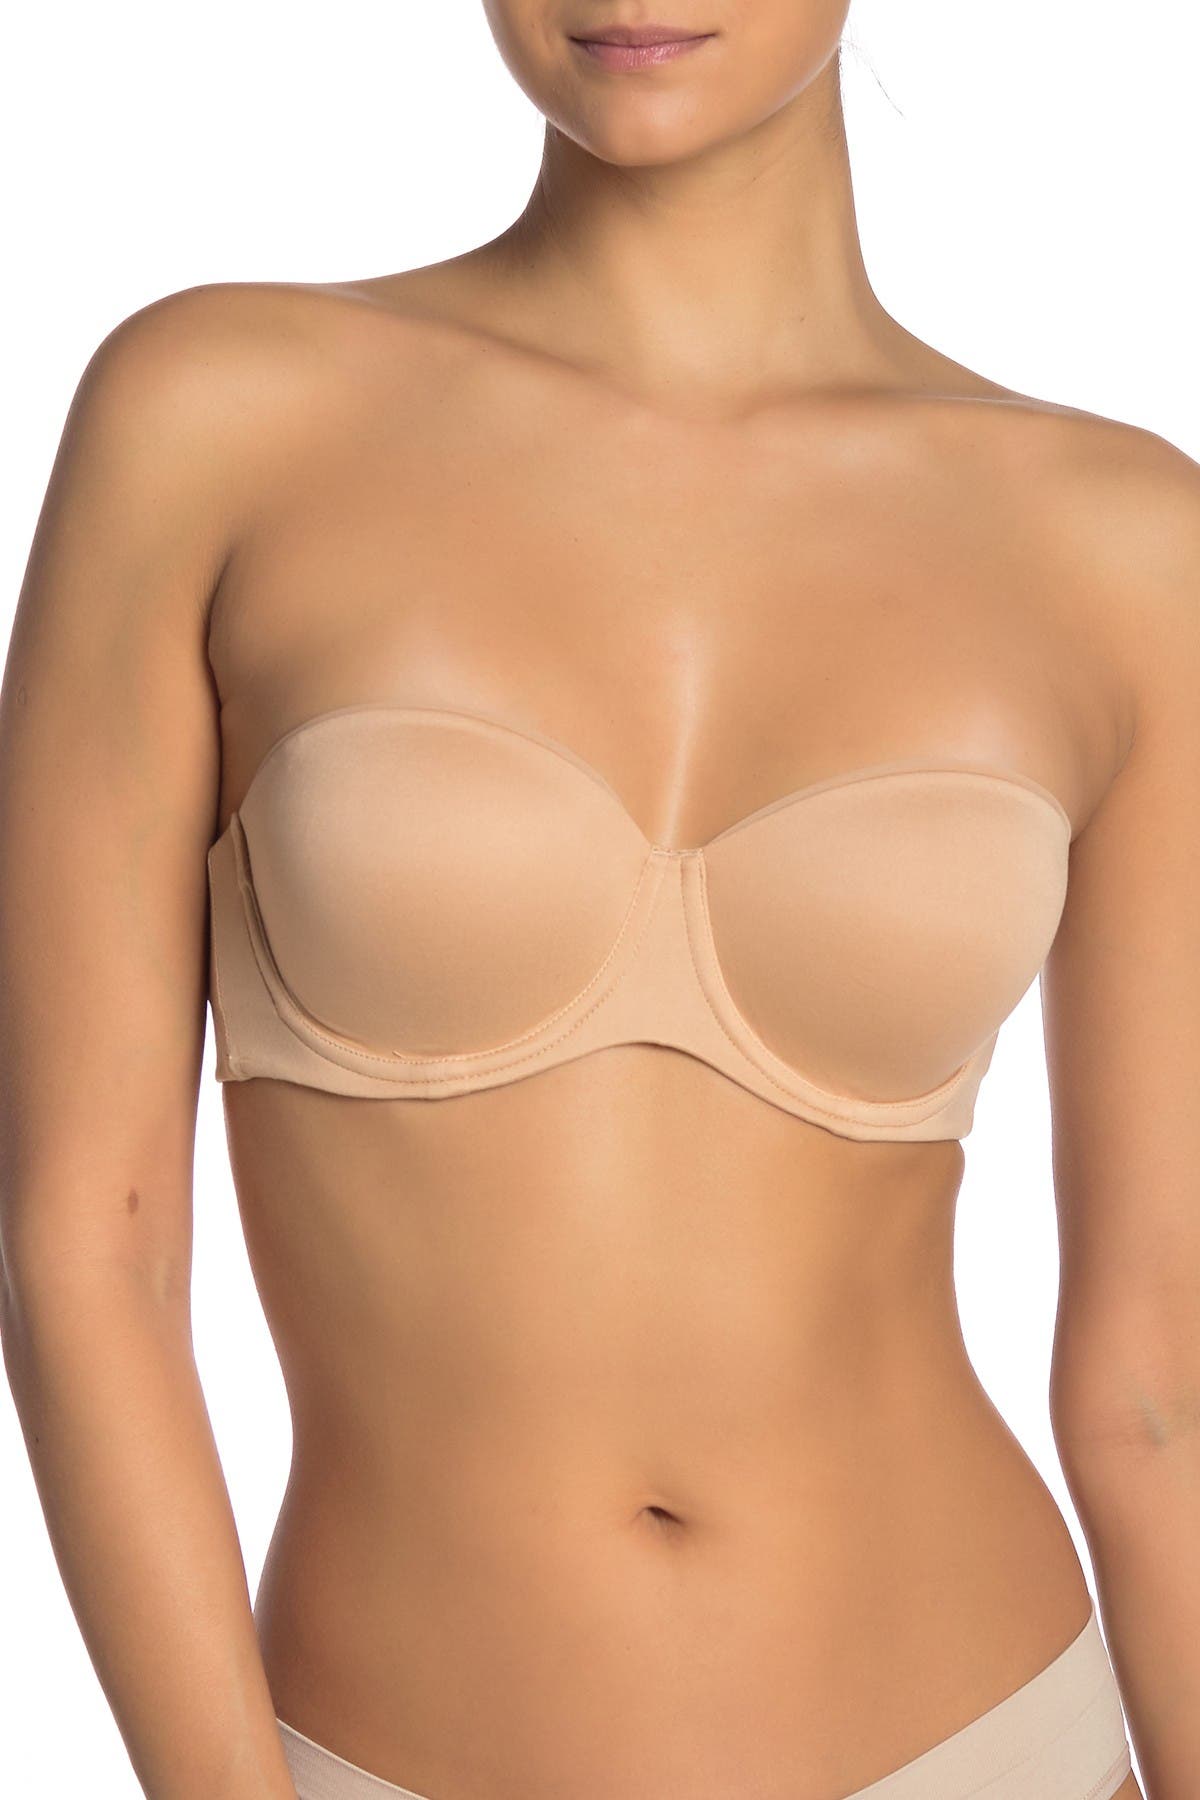 Calvin Klein Lightly Lined Constant Strapless Bra QF5528 - Macy's